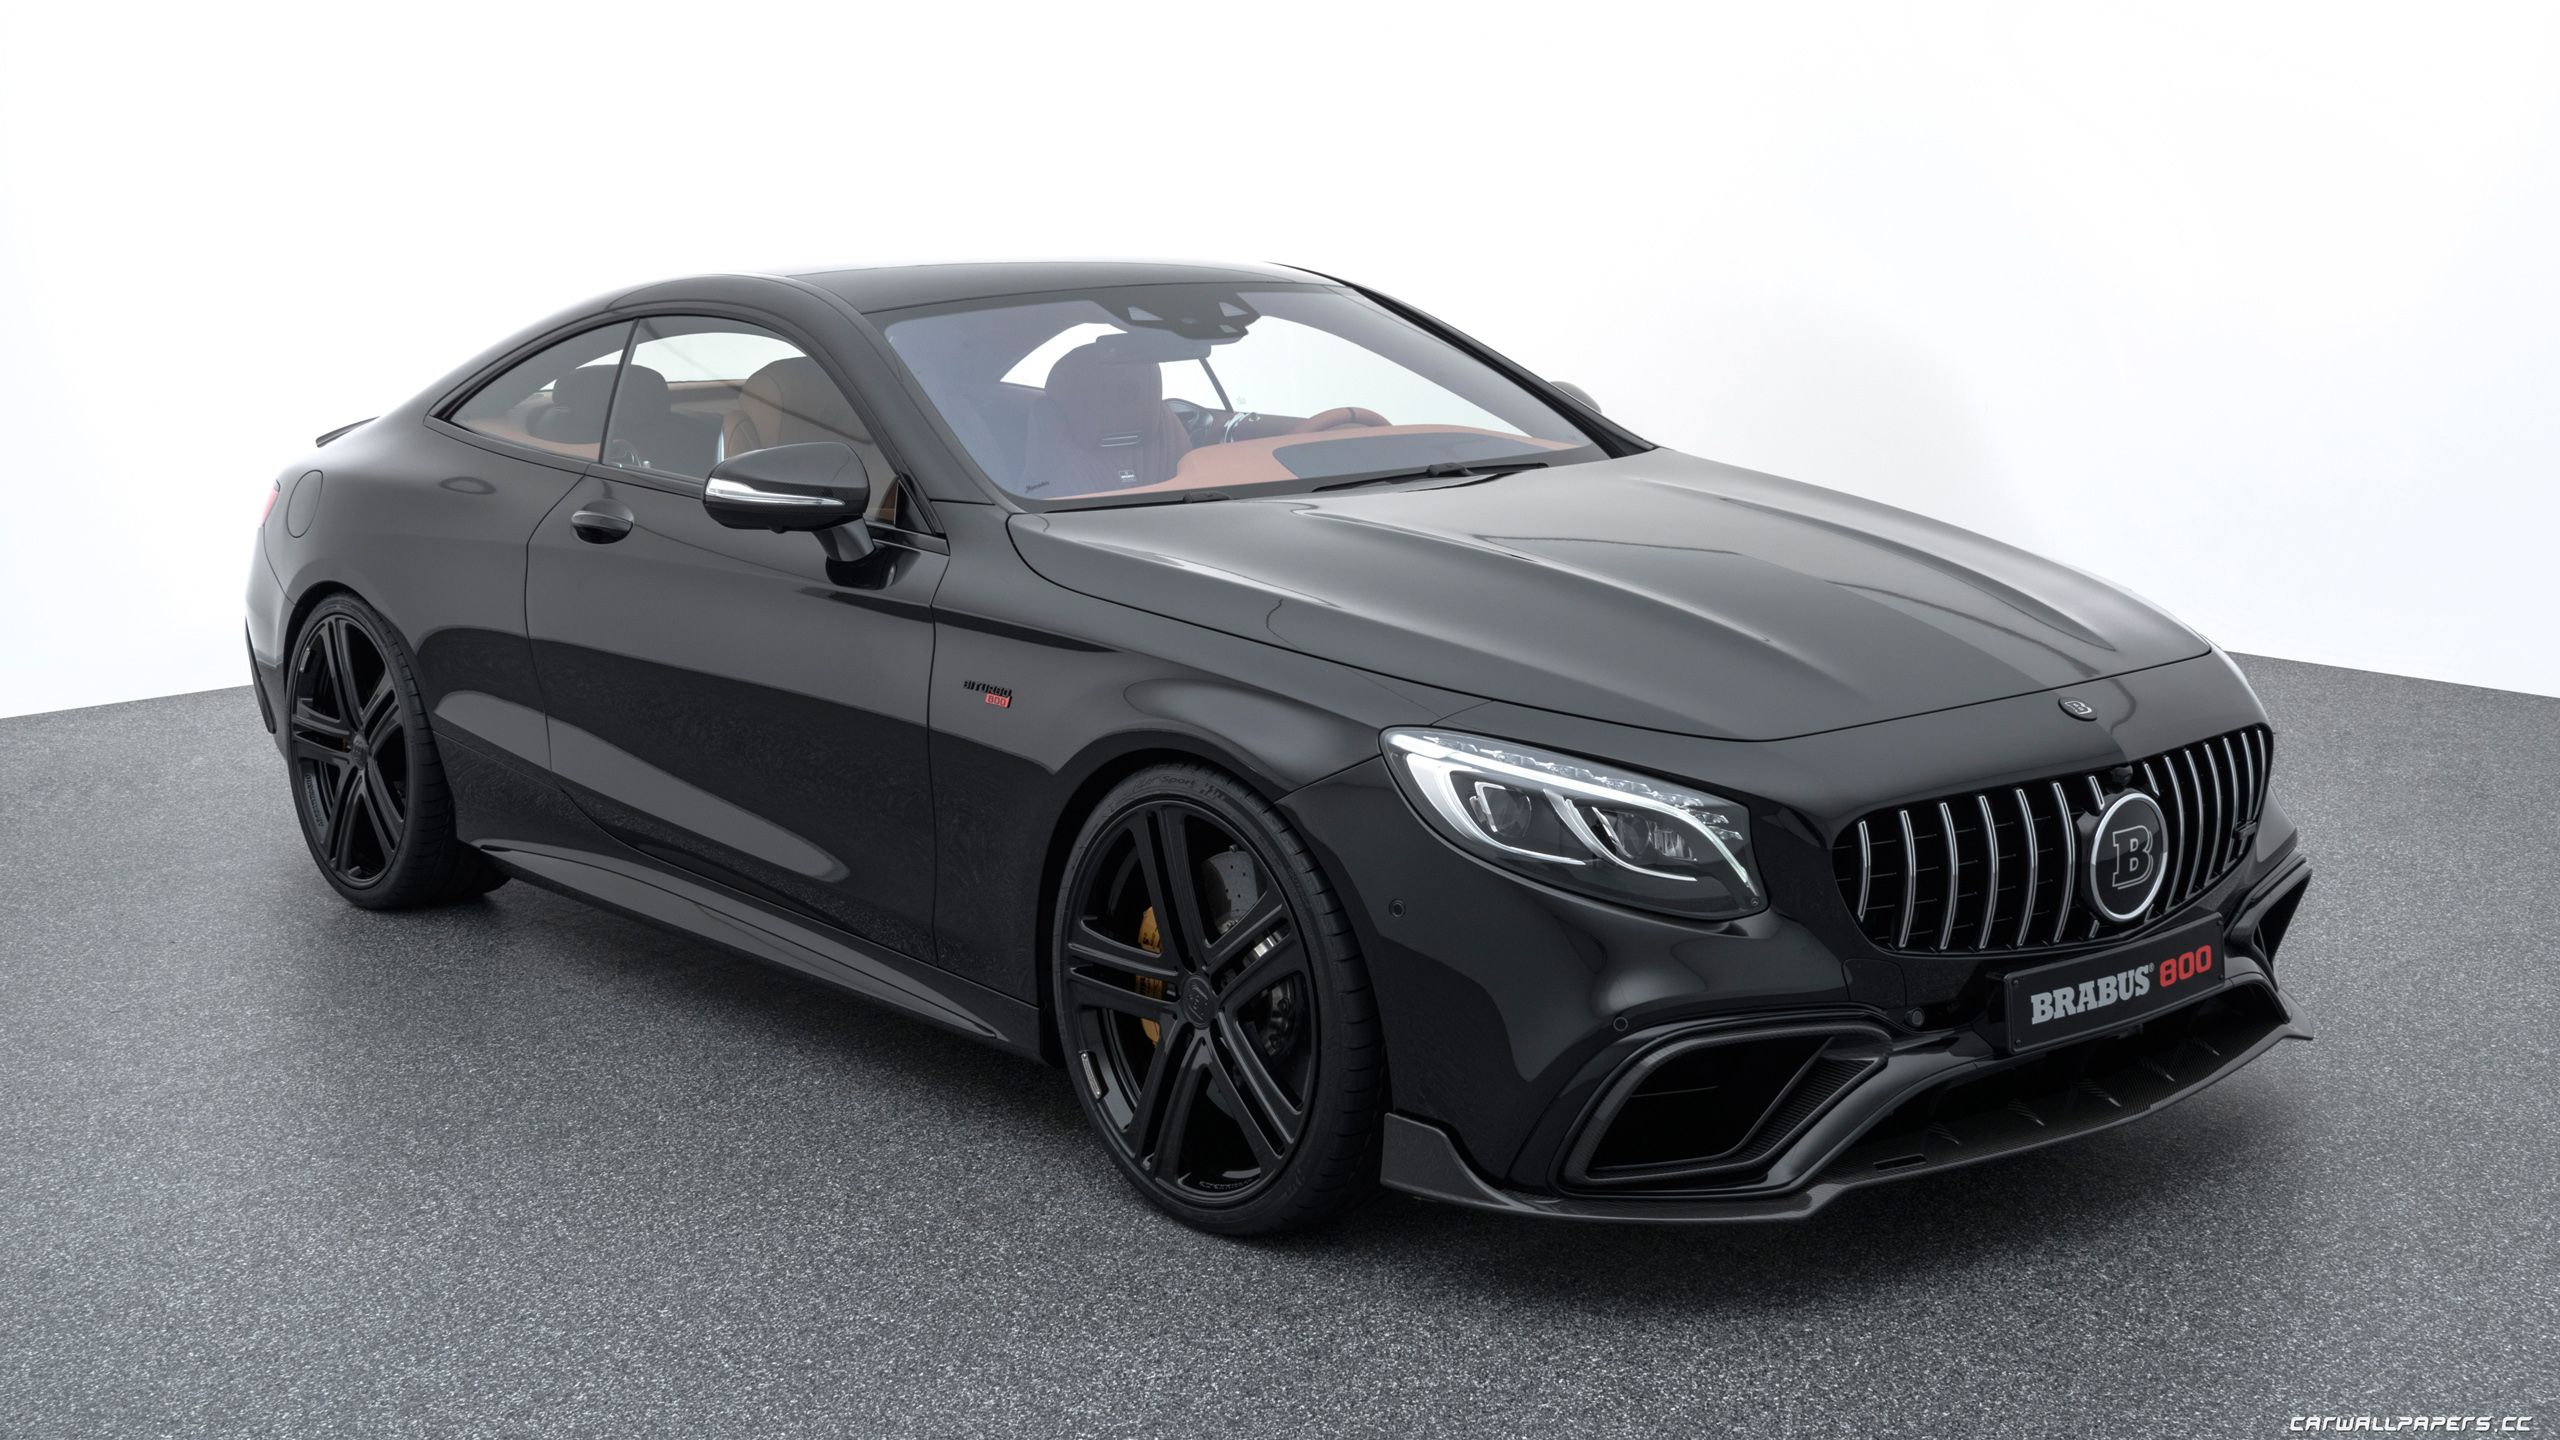 Brabus 800 Coupe Mercedes Amg S 63 4matic Coupe 800 S63